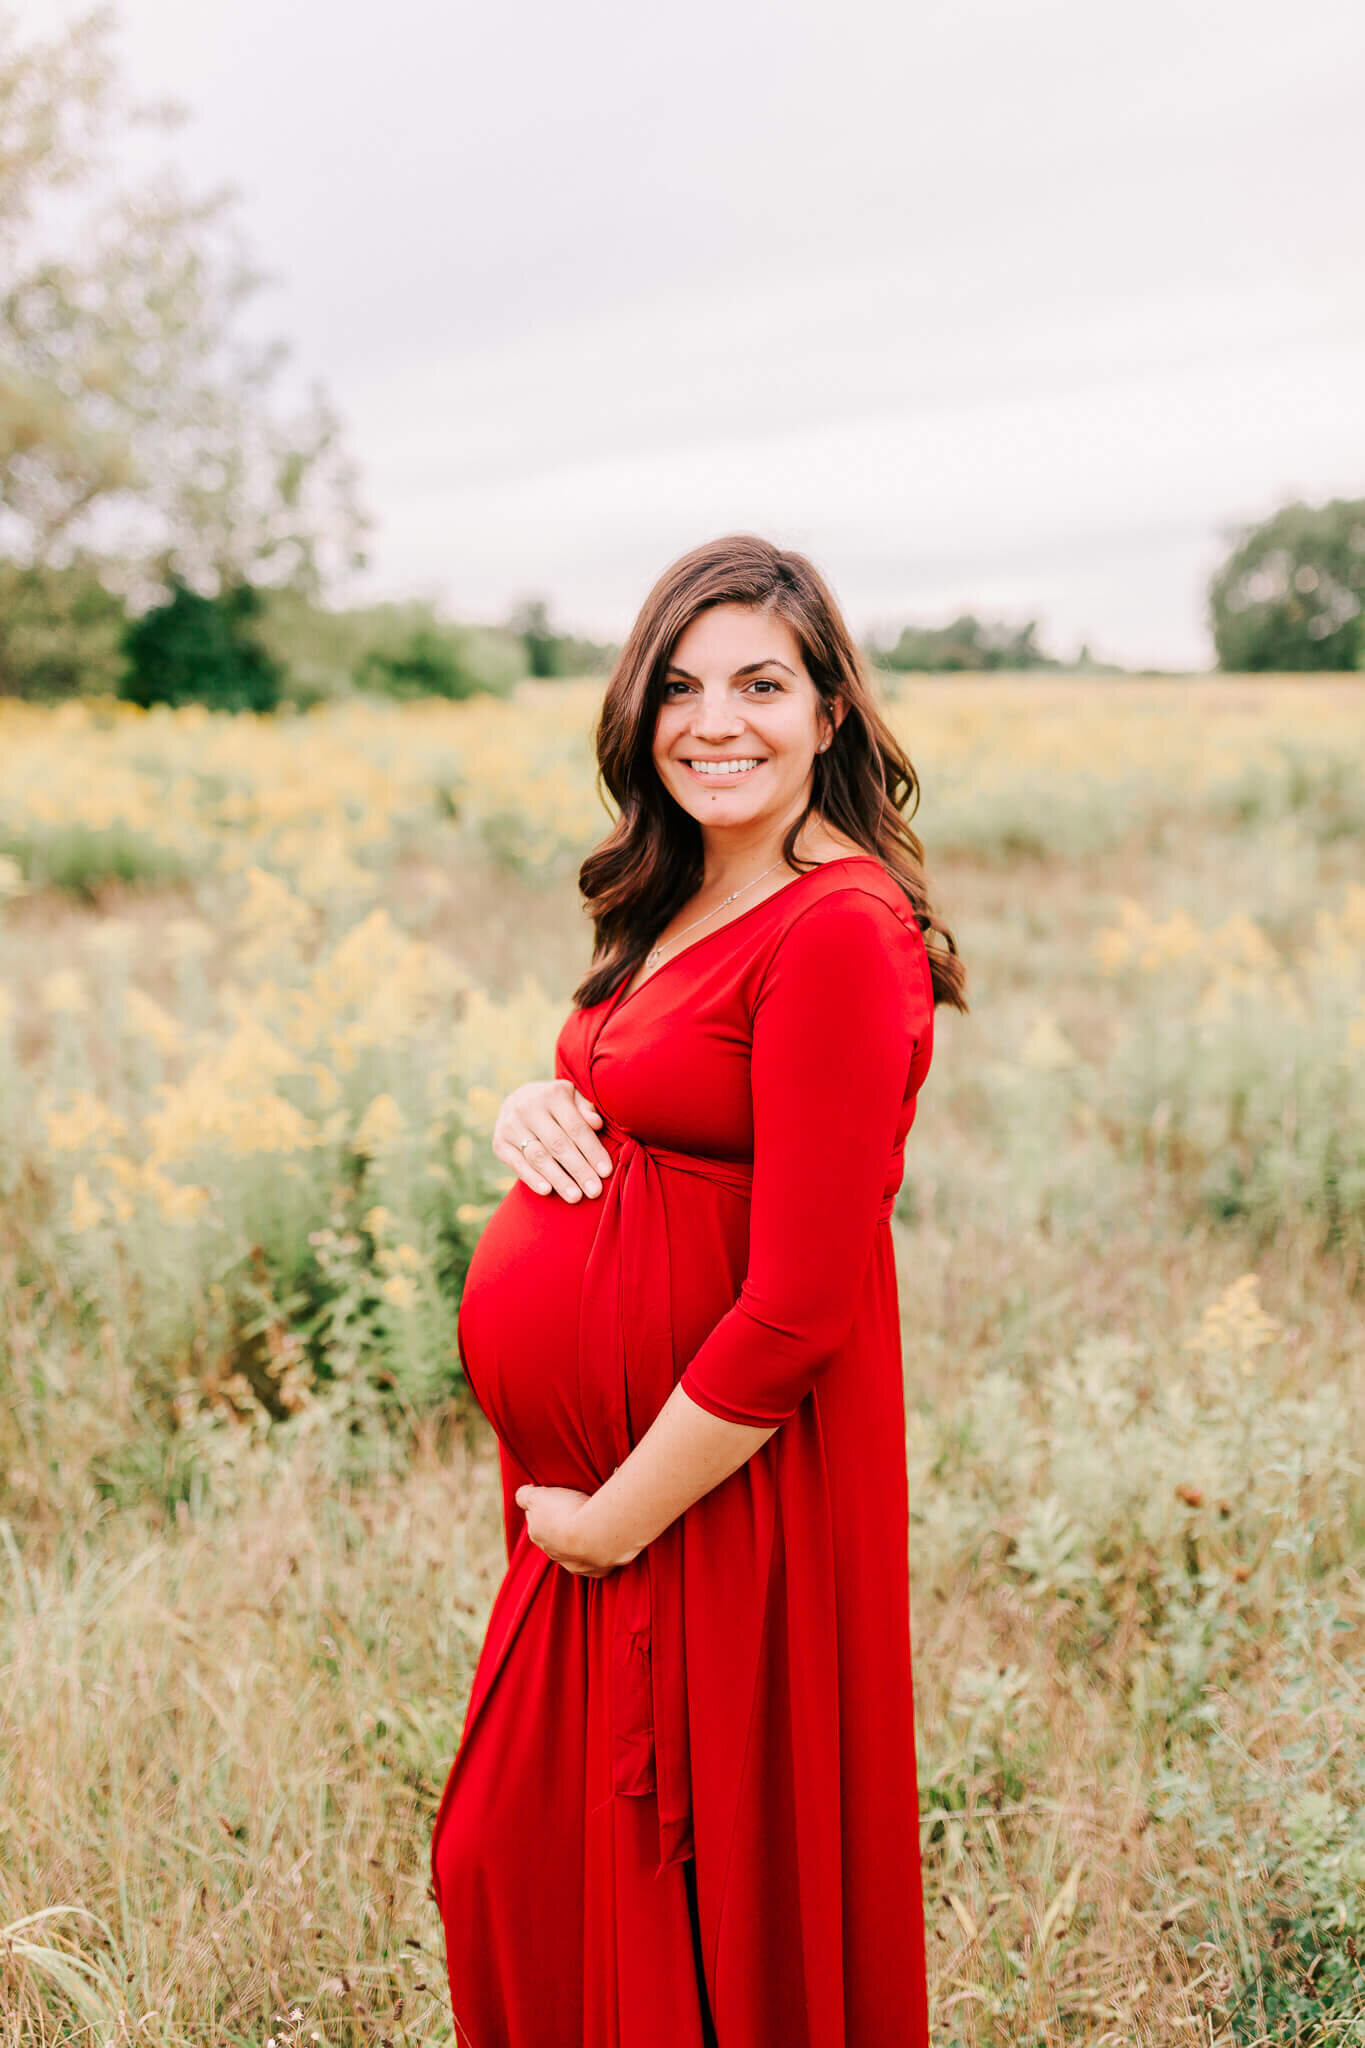 expecting mother of 3 stands in a red dress and holds her belly in a beautiful field of green and yellow.